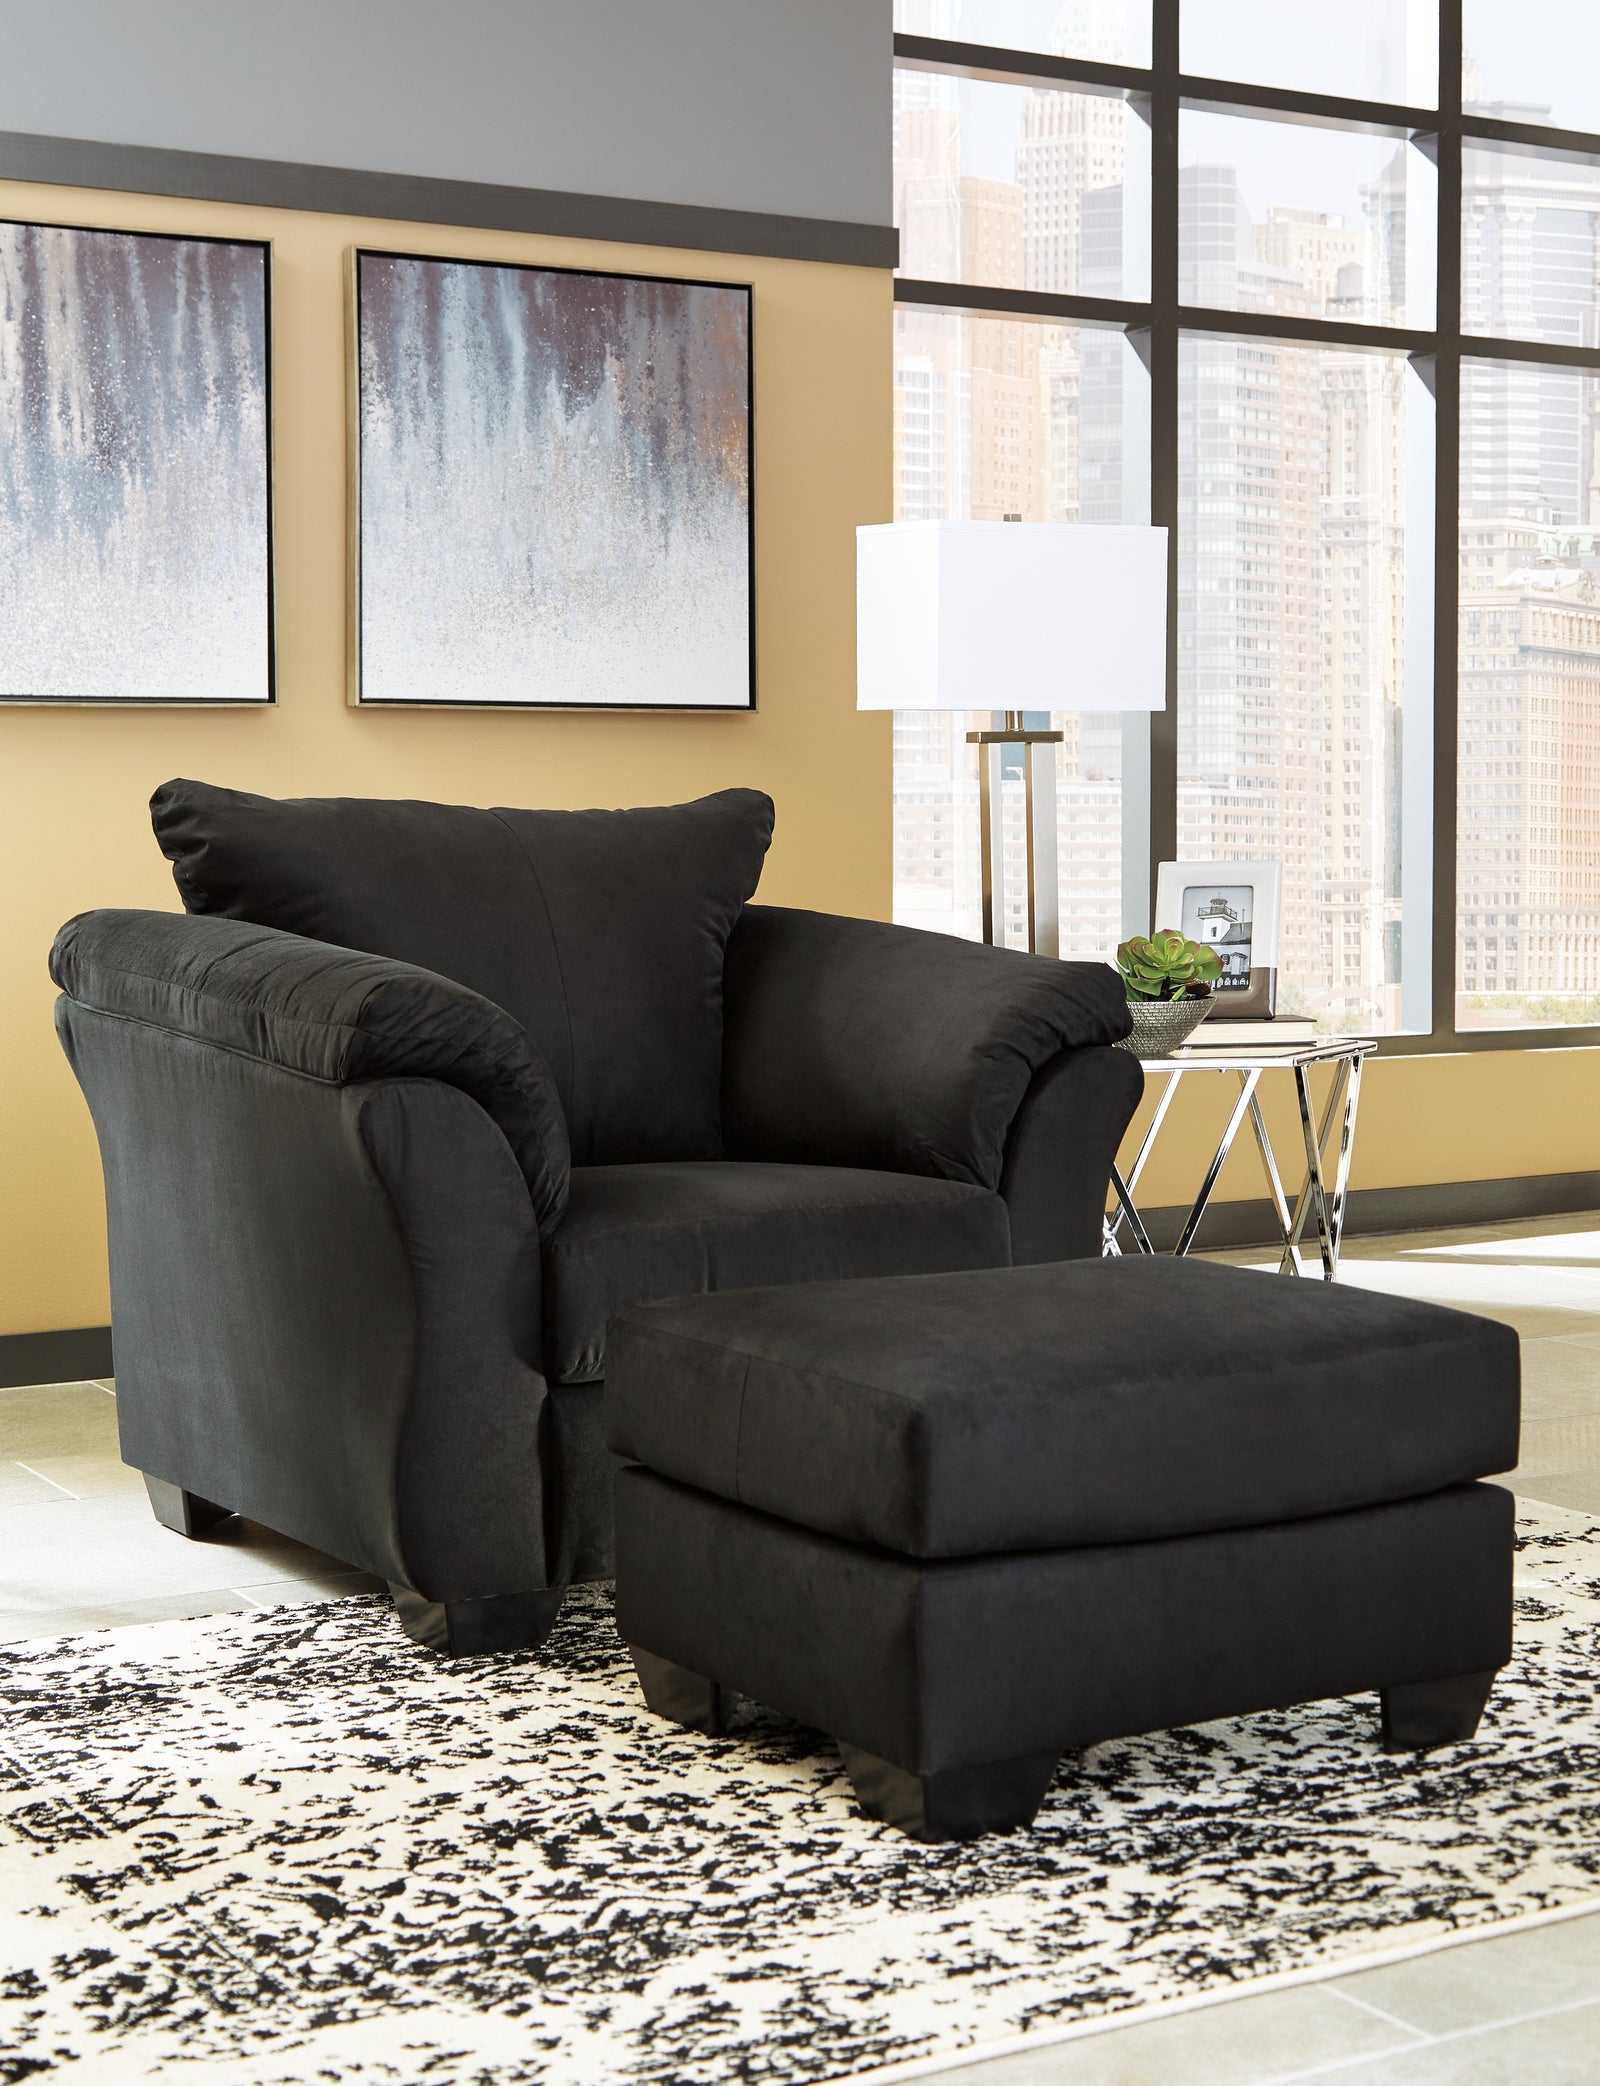 Darcy Black Chair And Ottoman